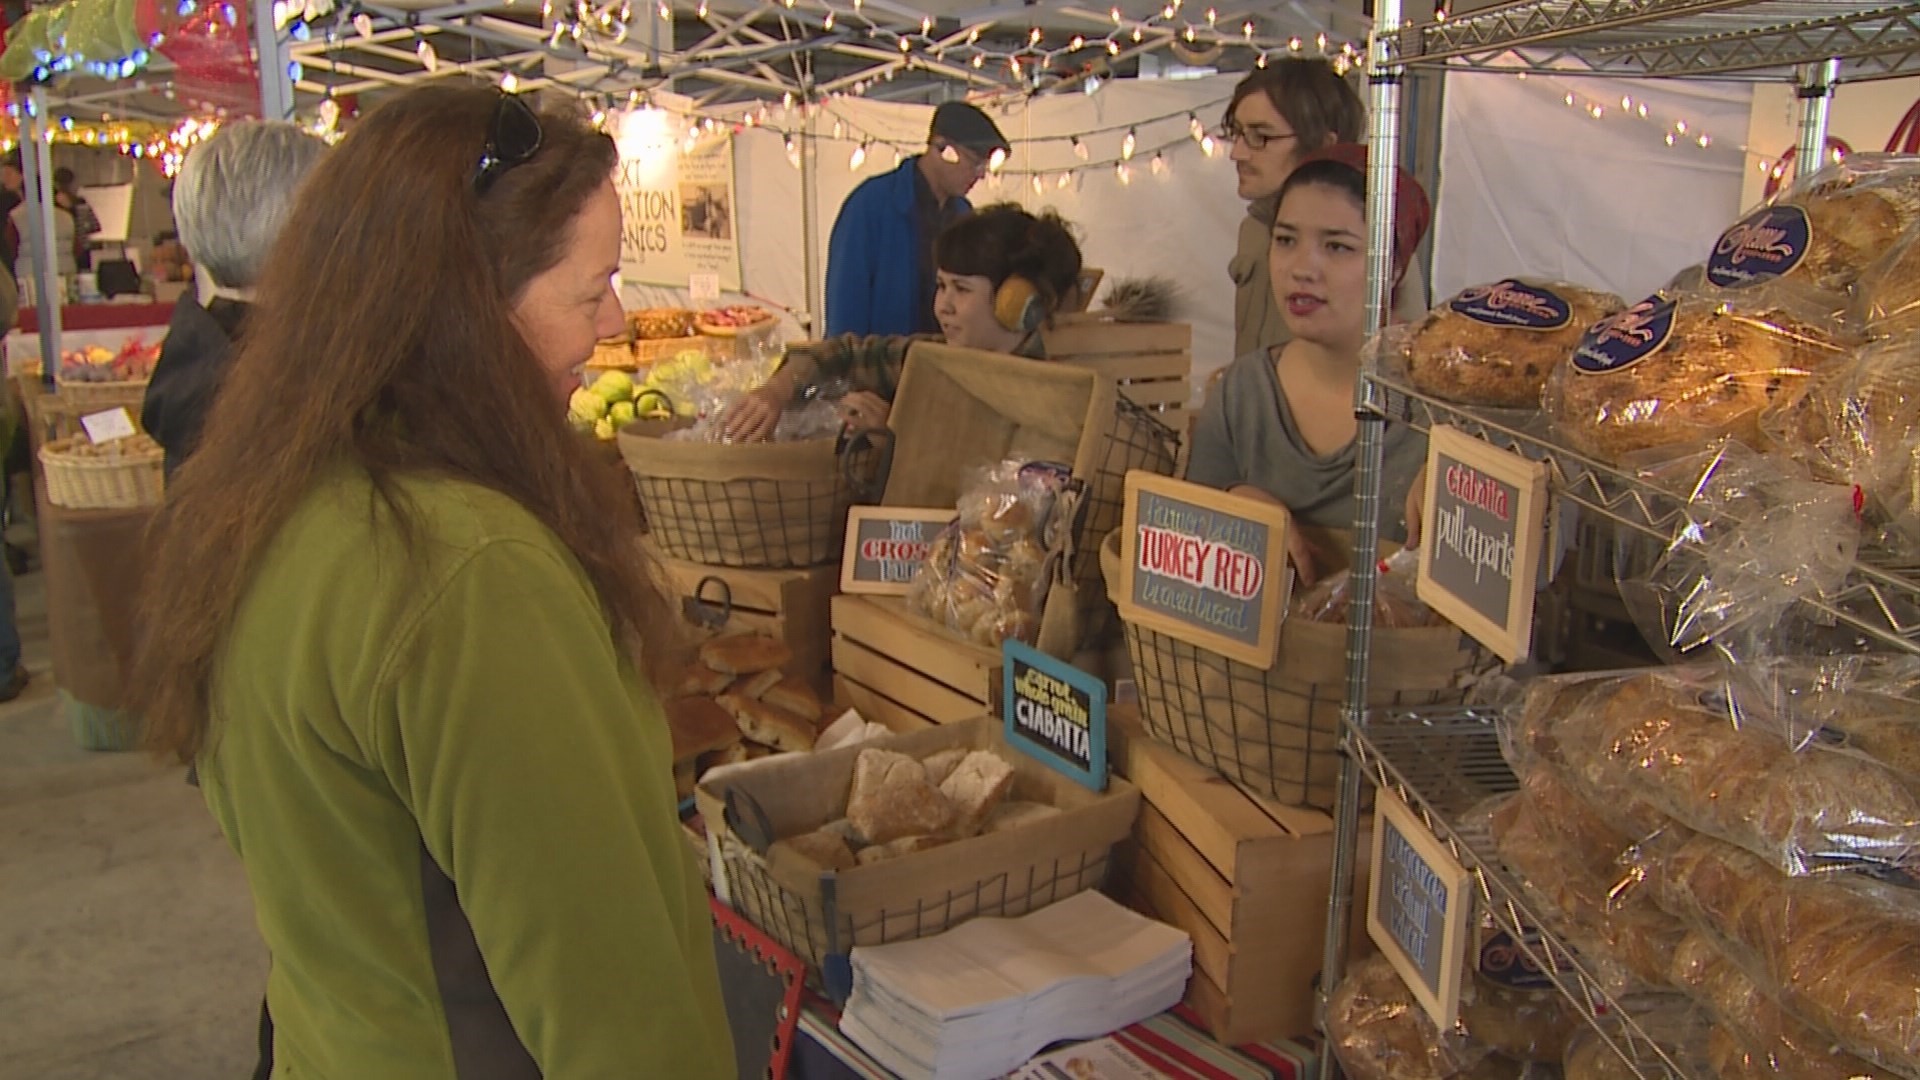 The weekly market just held its last outdoor market for the year last weekend.